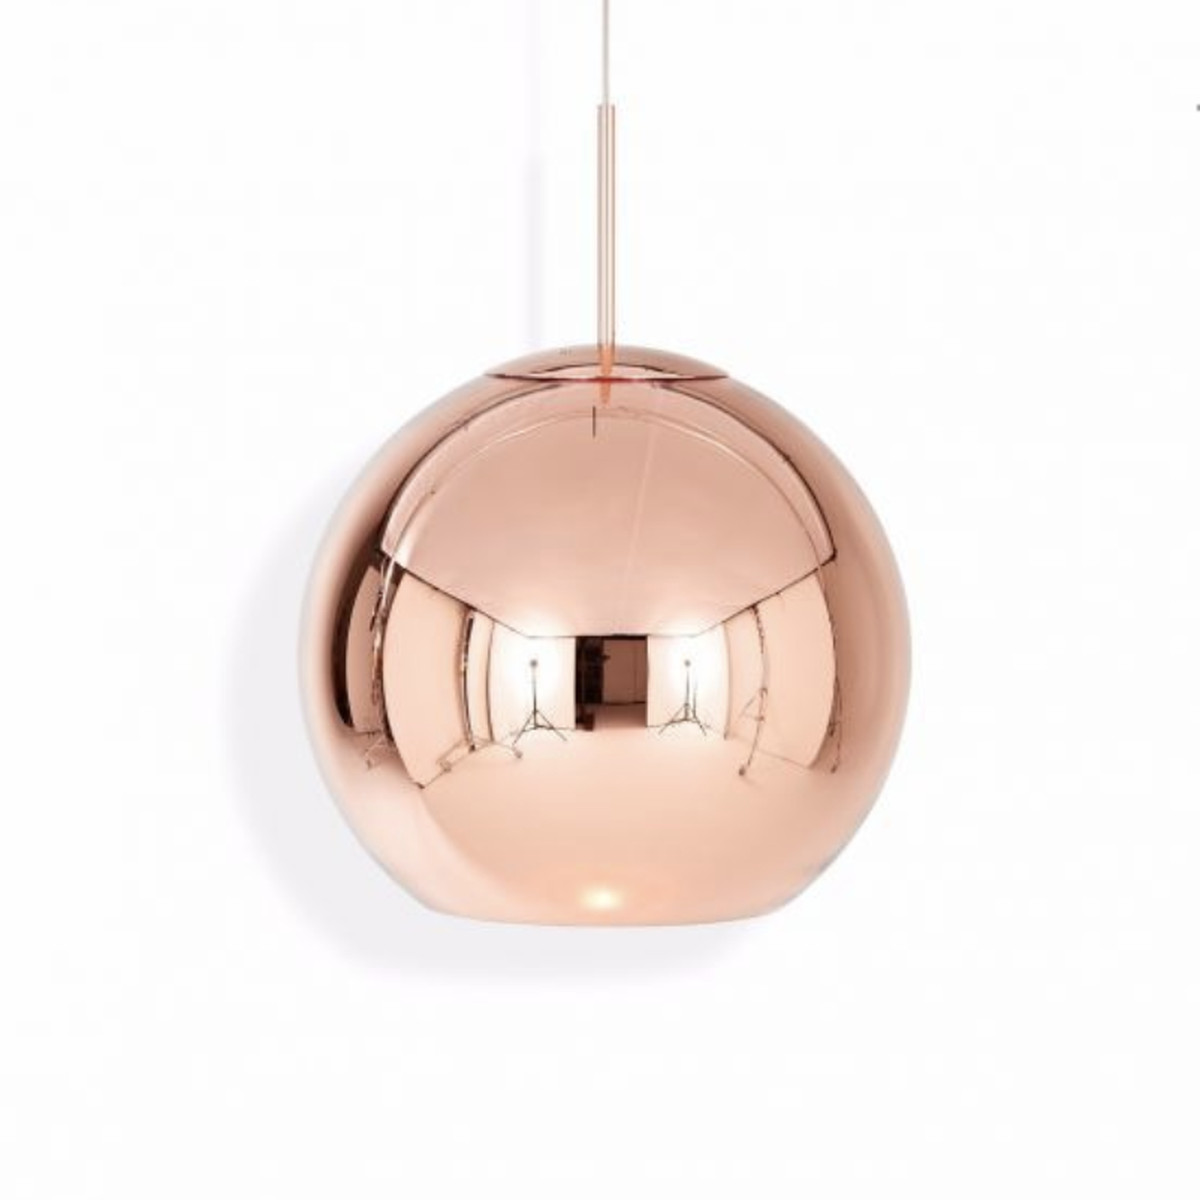 A round copper-colored light pendant that hangs from the ceiling. 